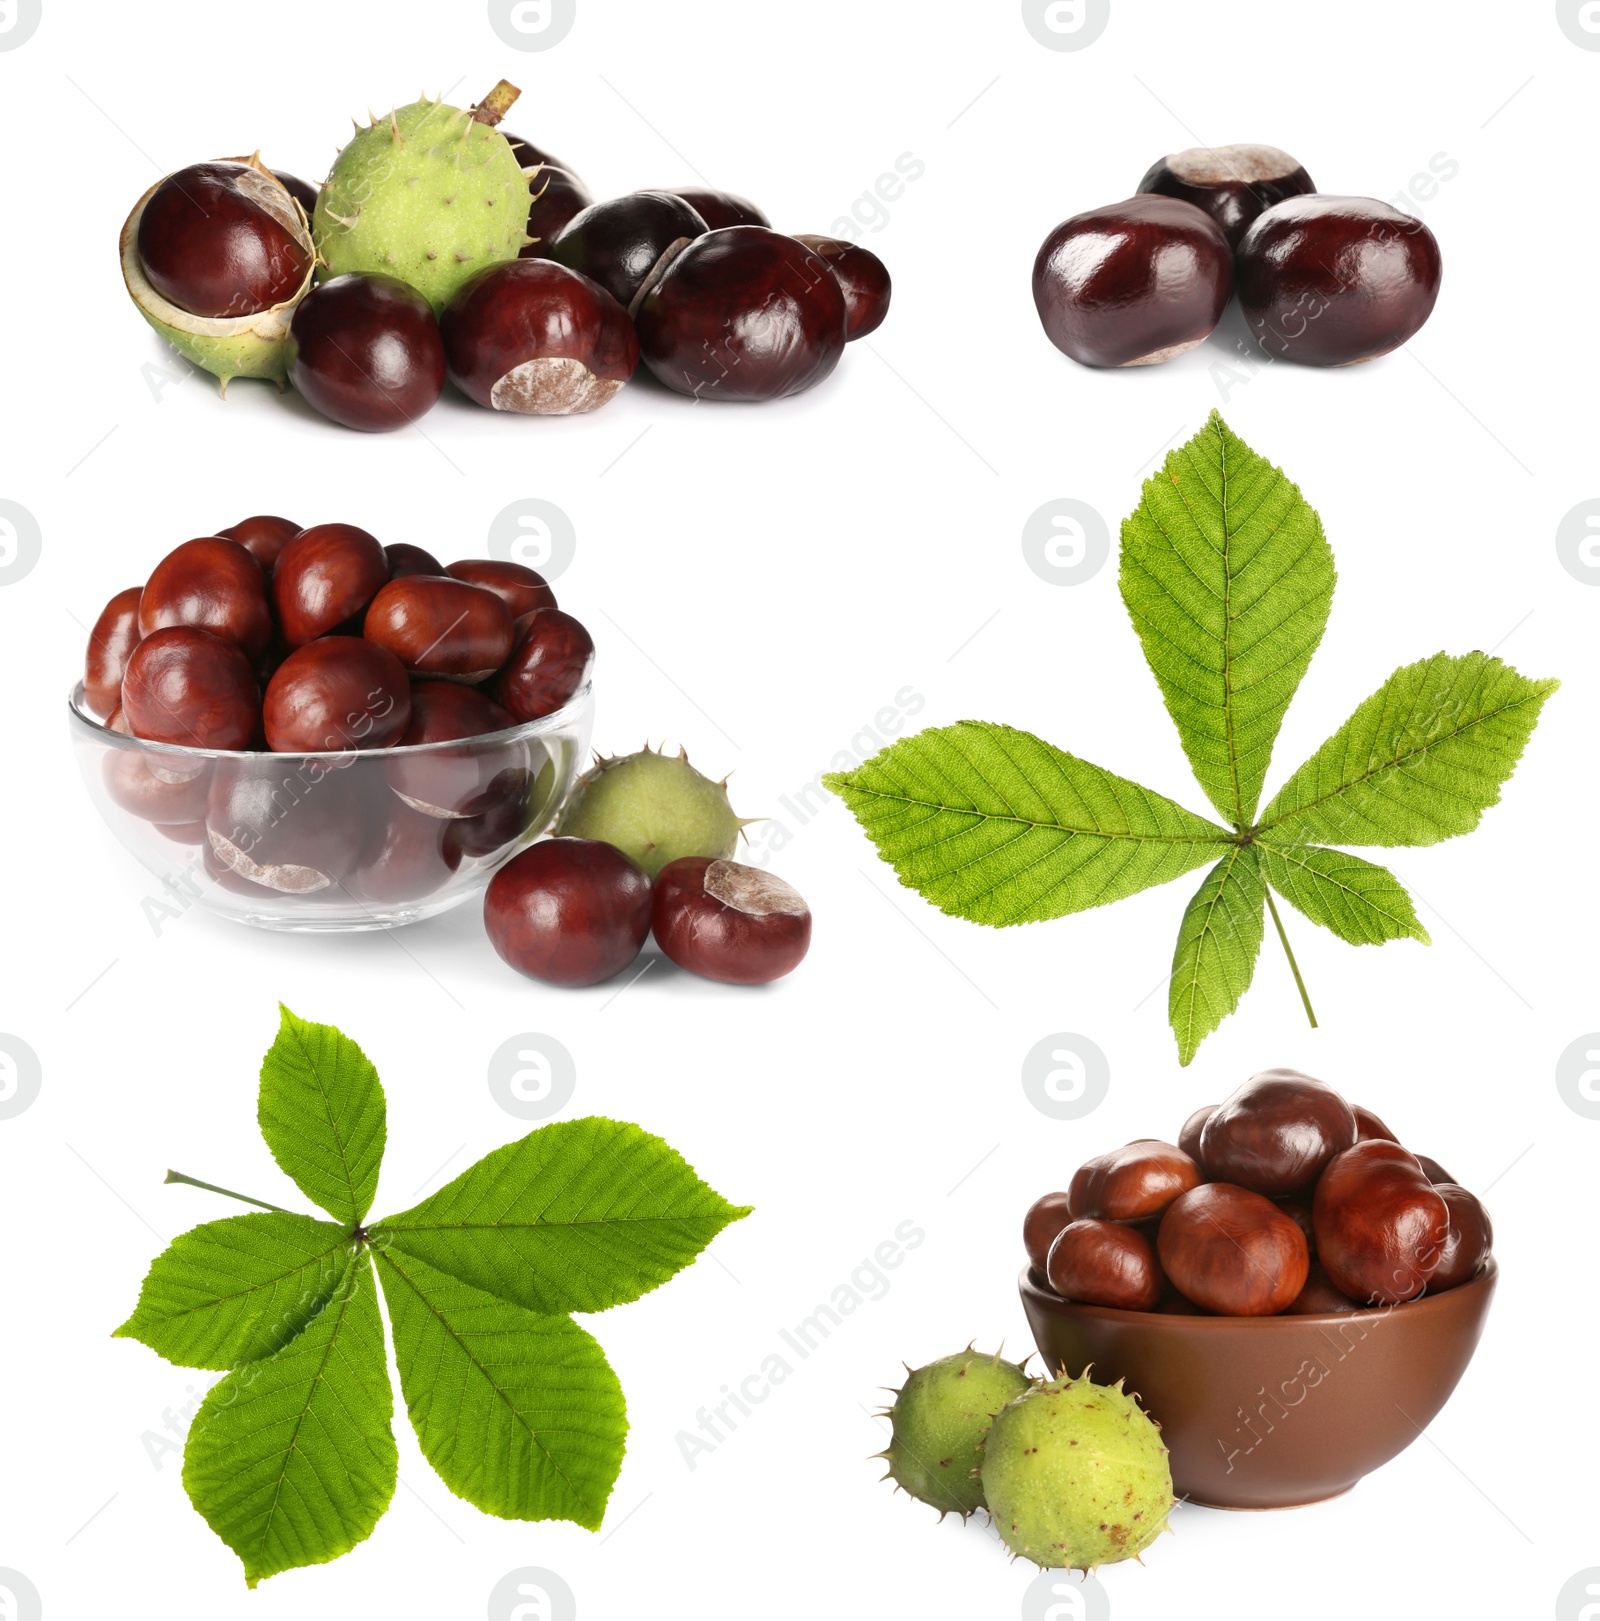 Image of Set of brown horse chestnuts with green leaves isolated on white